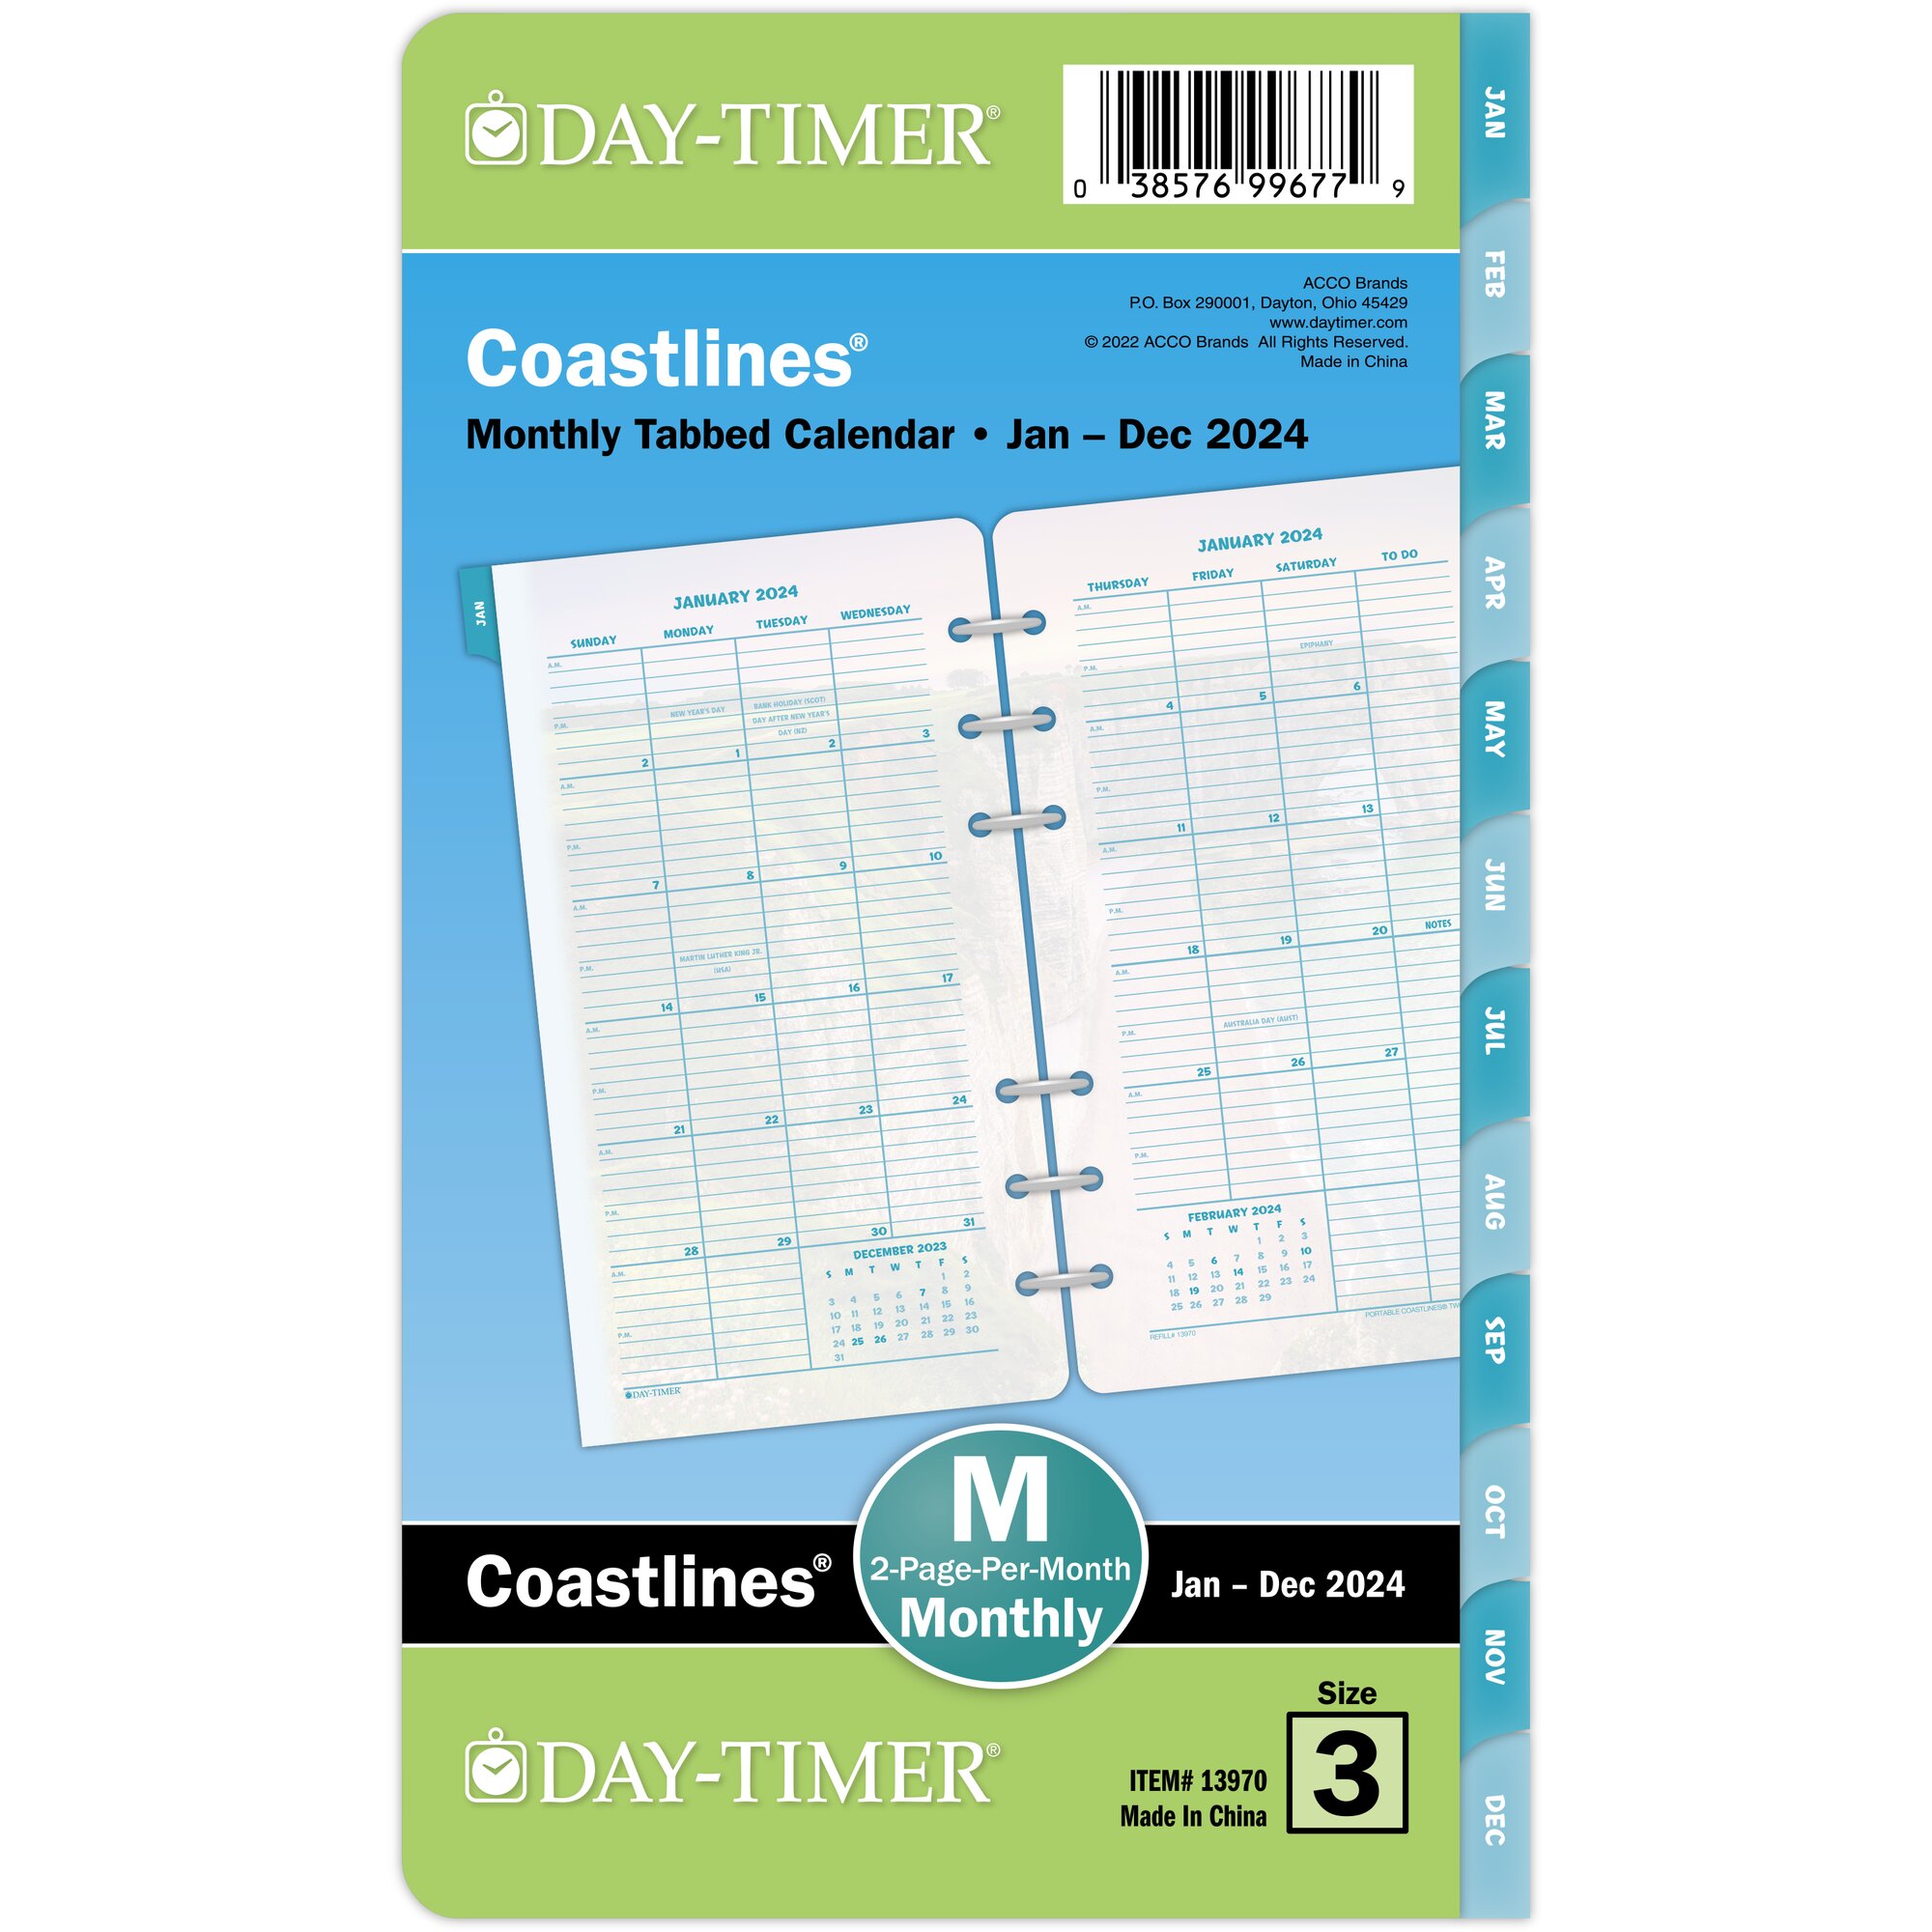 DAYTIMER COASTLINES JANUARY 2024 December 2024 Two Page Per Month